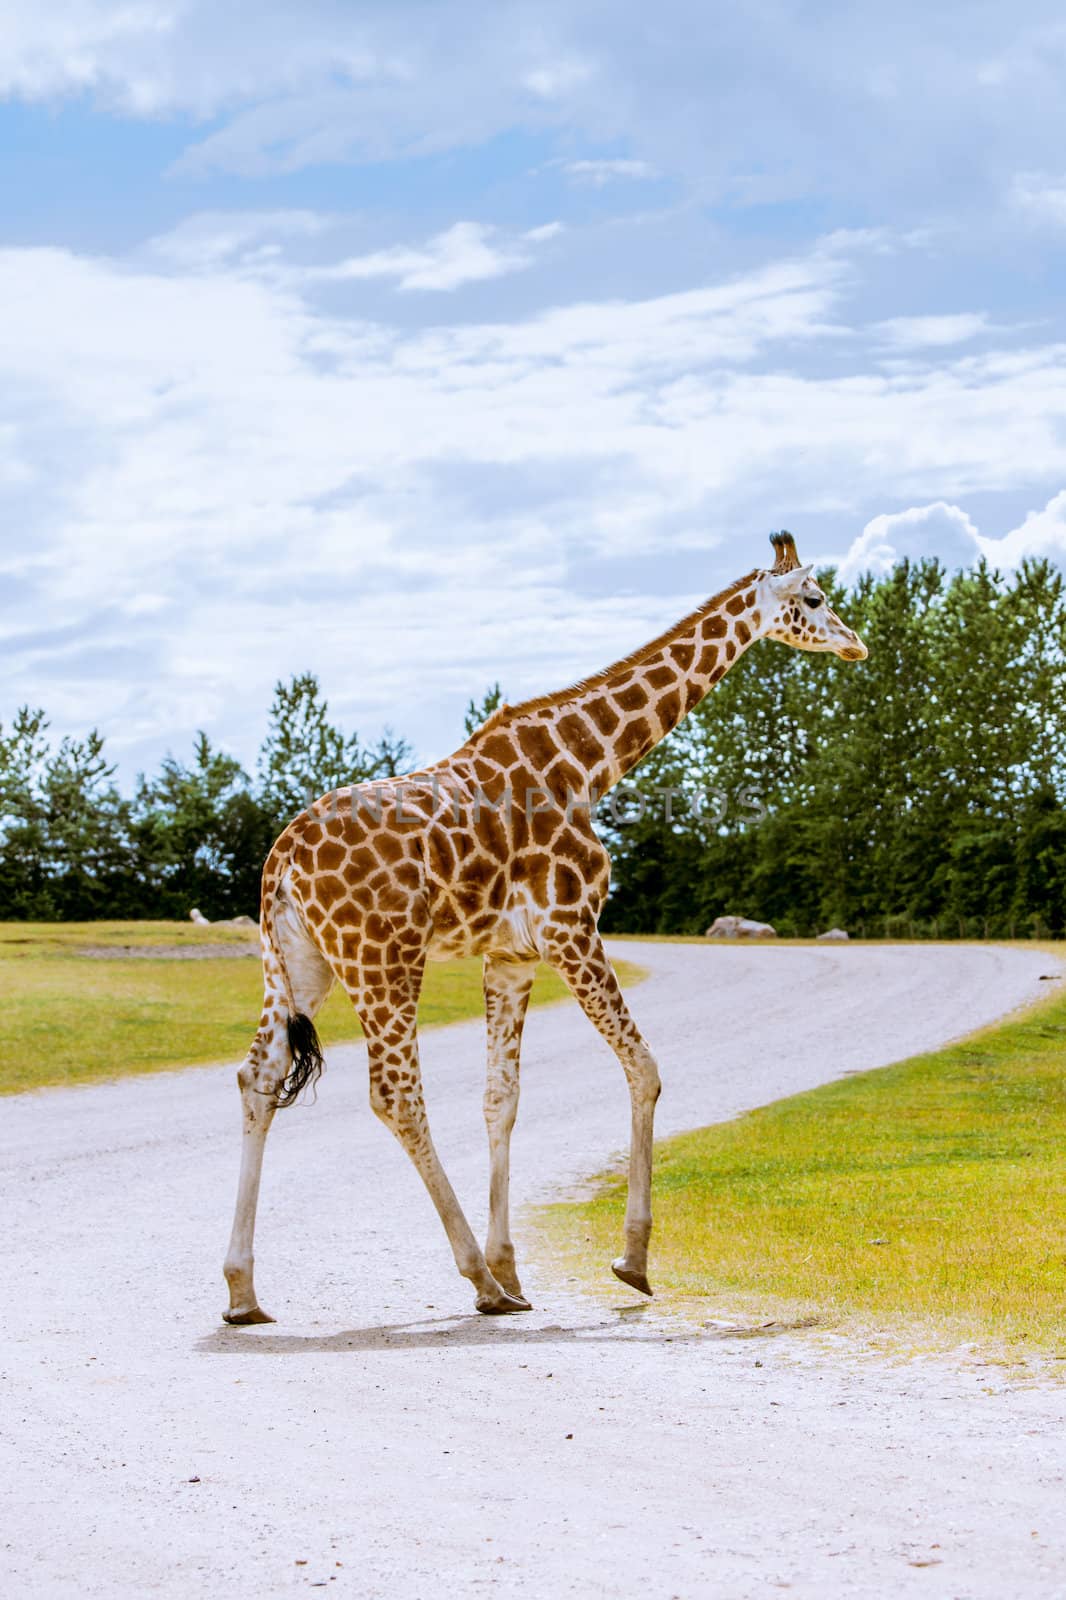 Lonely giraffe on the road by Sportactive